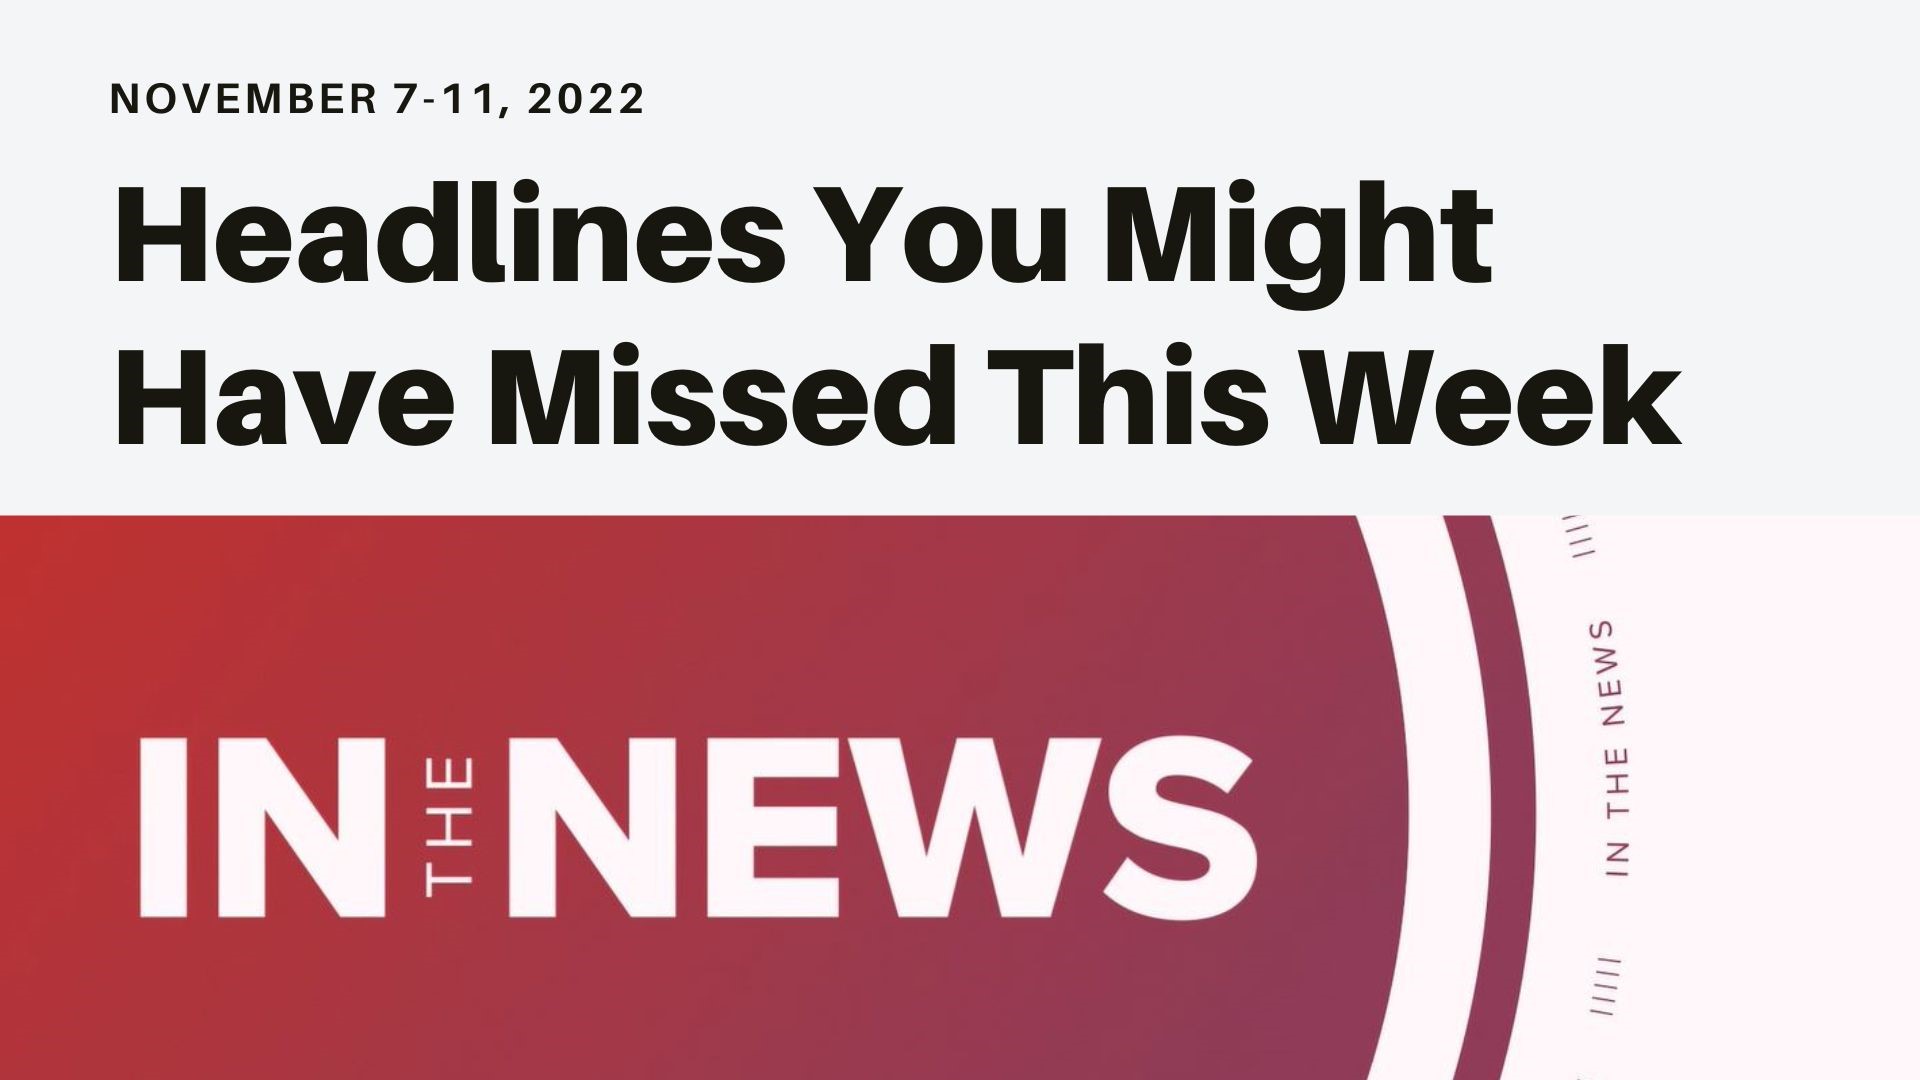 A look at the news you might have missed this week from election results in the 2022 midterms to the impact of daylight saving time and a big honor for Chris Evans.